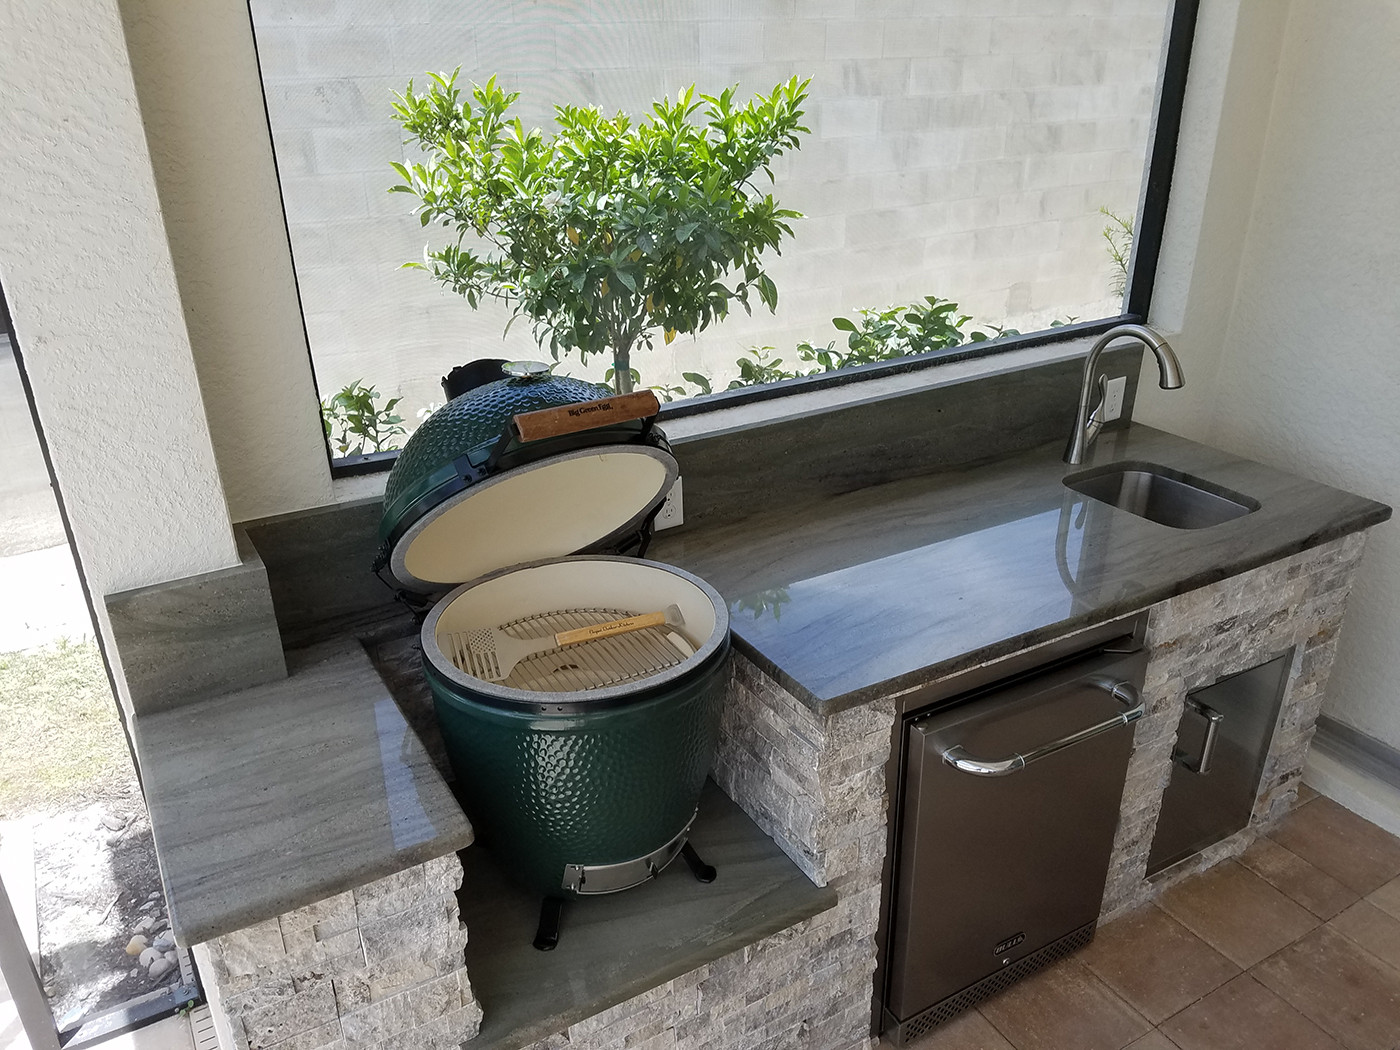 Green Egg Outdoor Kitchen
 The Big Green Egg Outdoor Kitchen Elegant Outdoor Kitchens